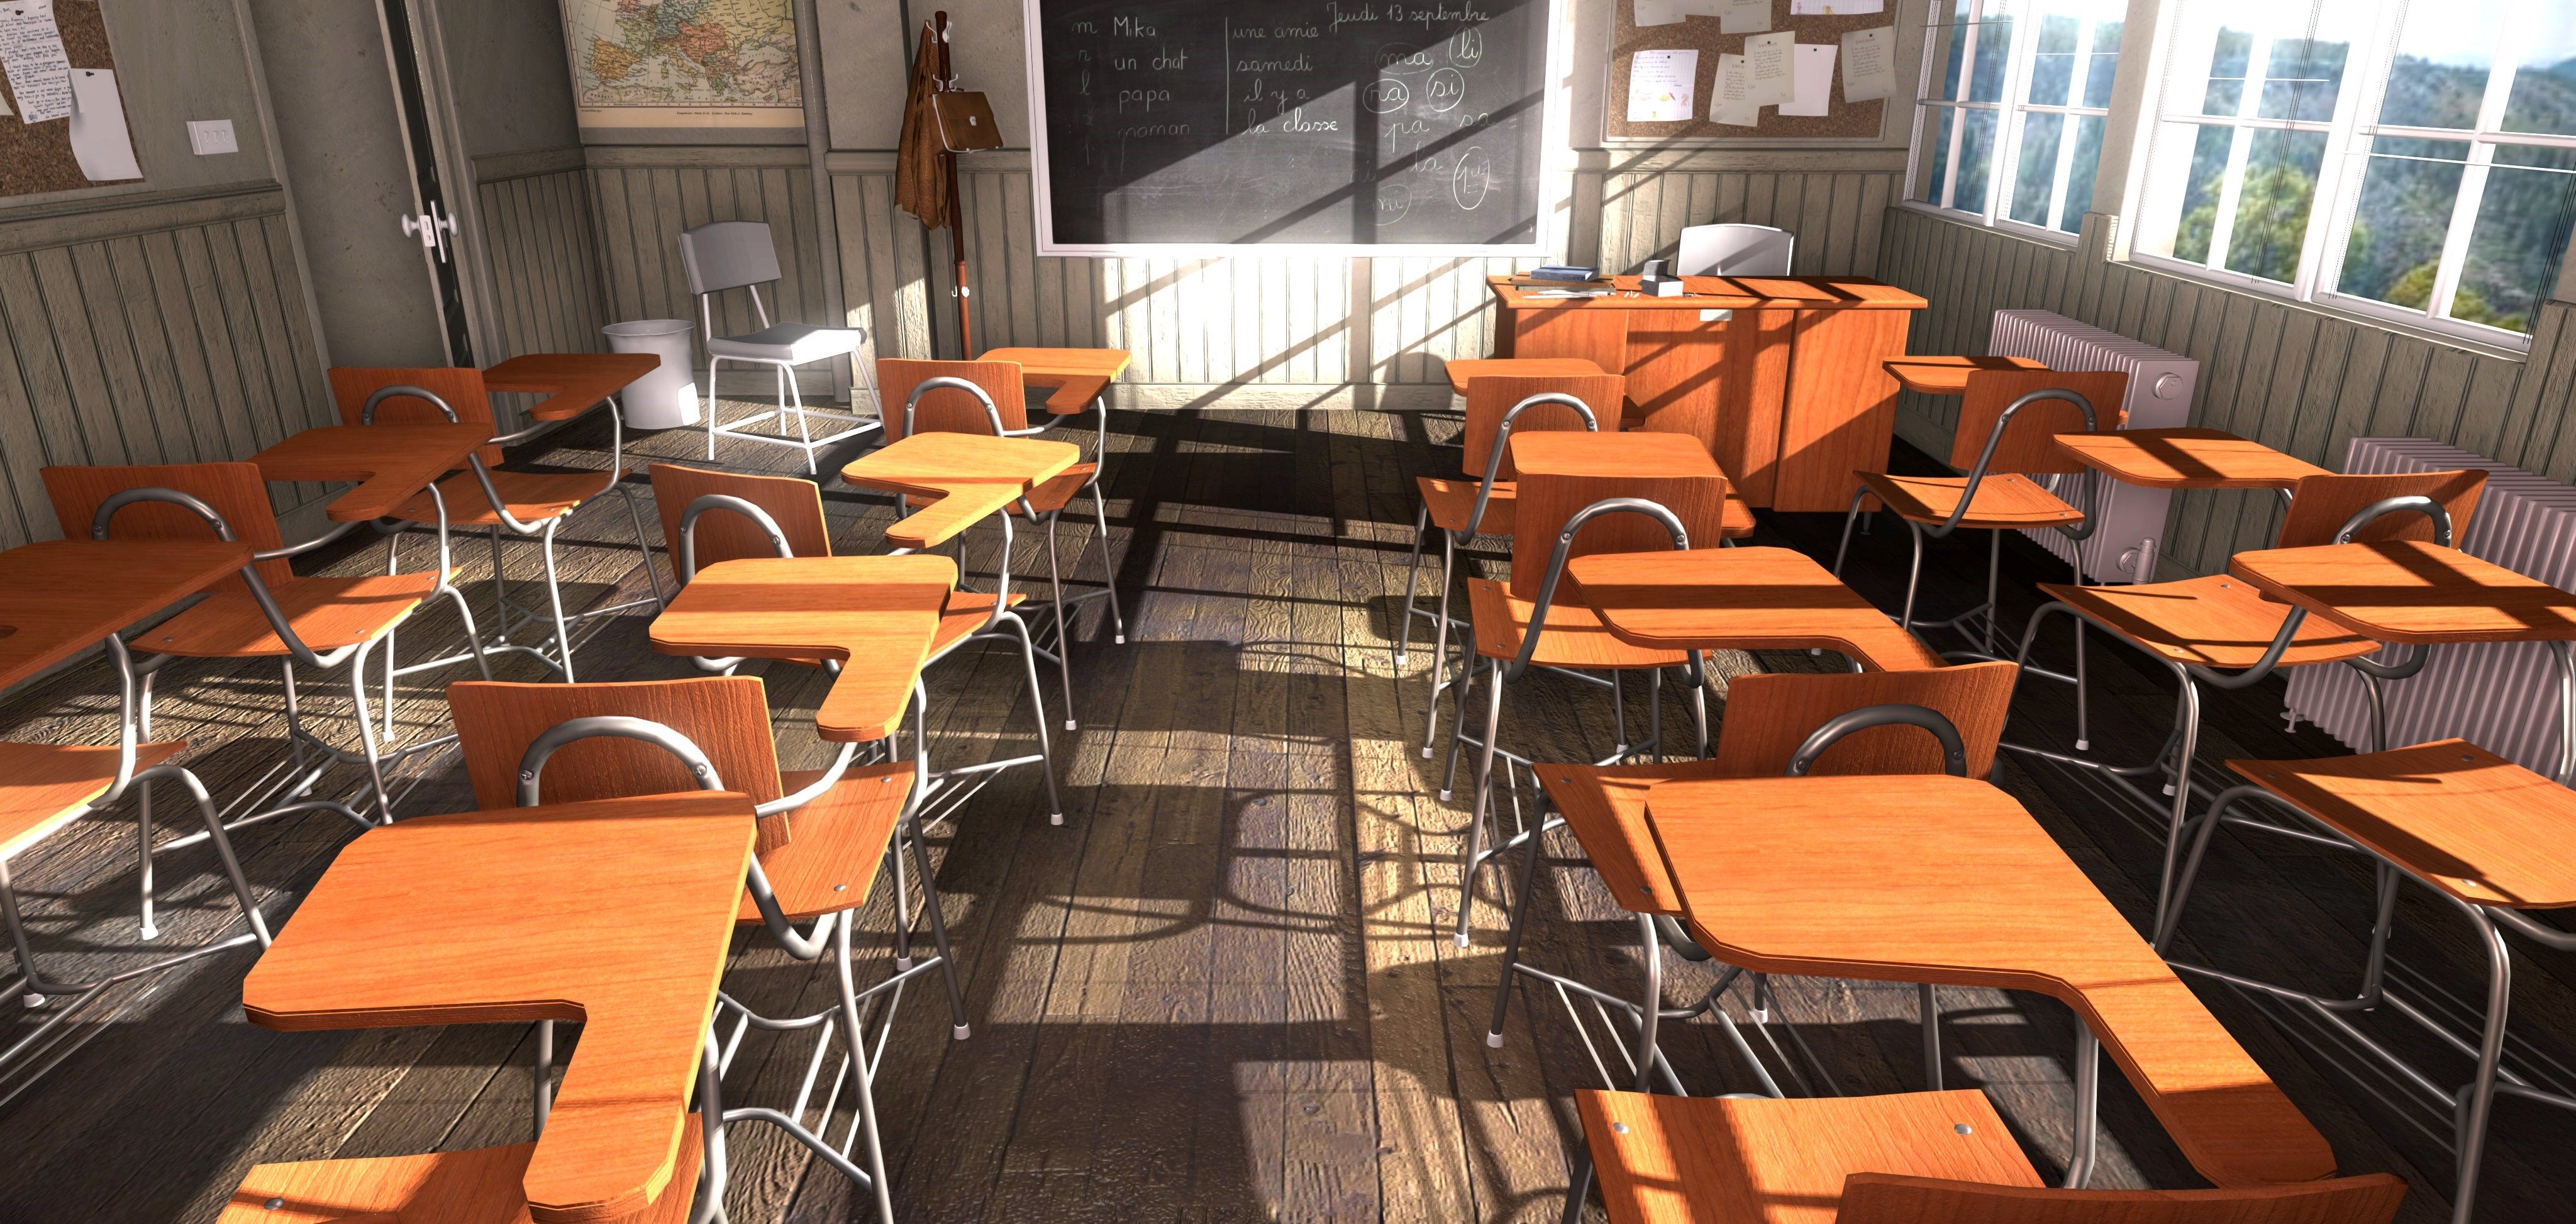 Class Room real-time rendering